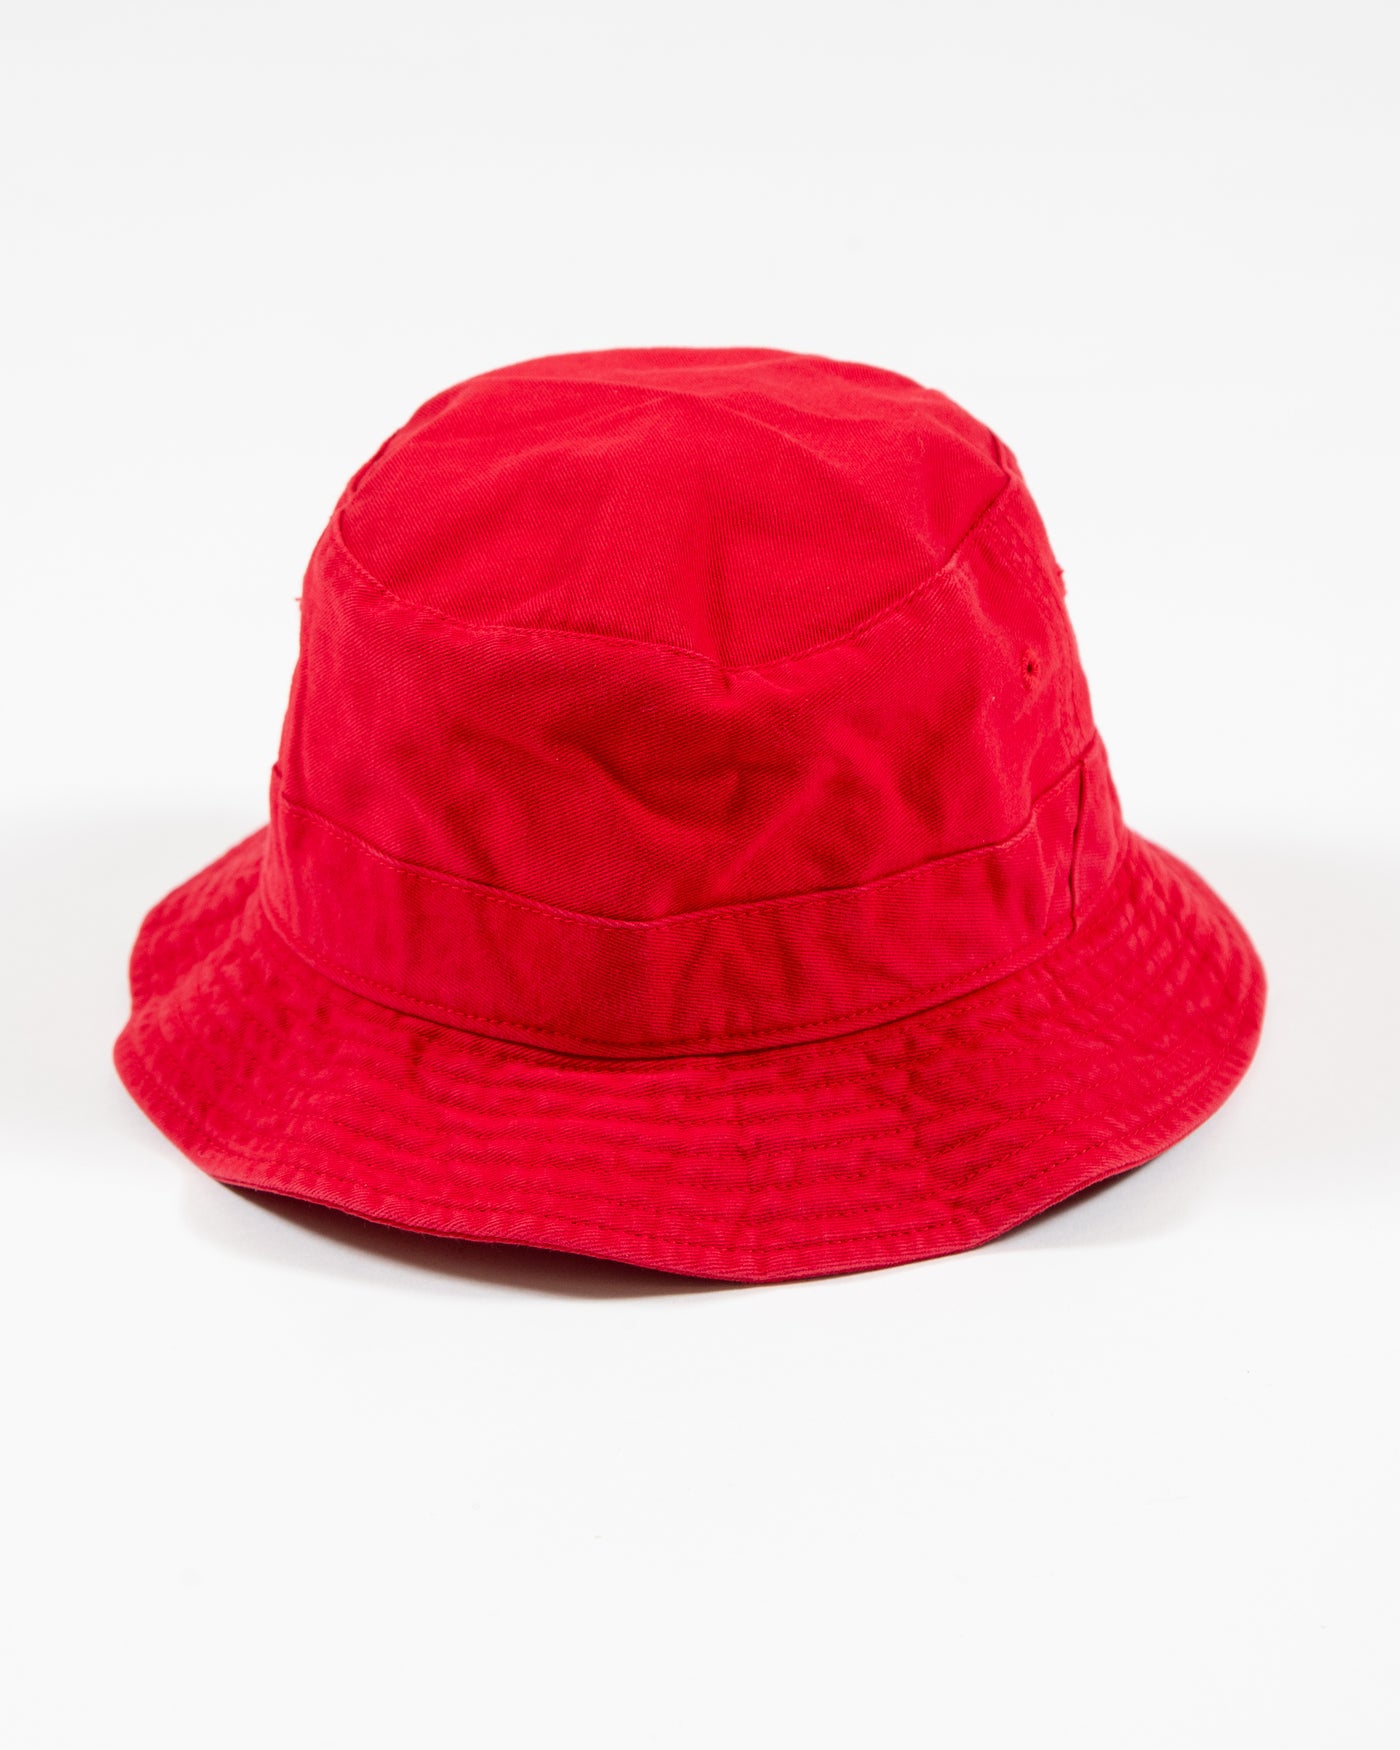 red '47 bucket hat with Chicago Blackhawks primary logo embroidered on front - back lay flat